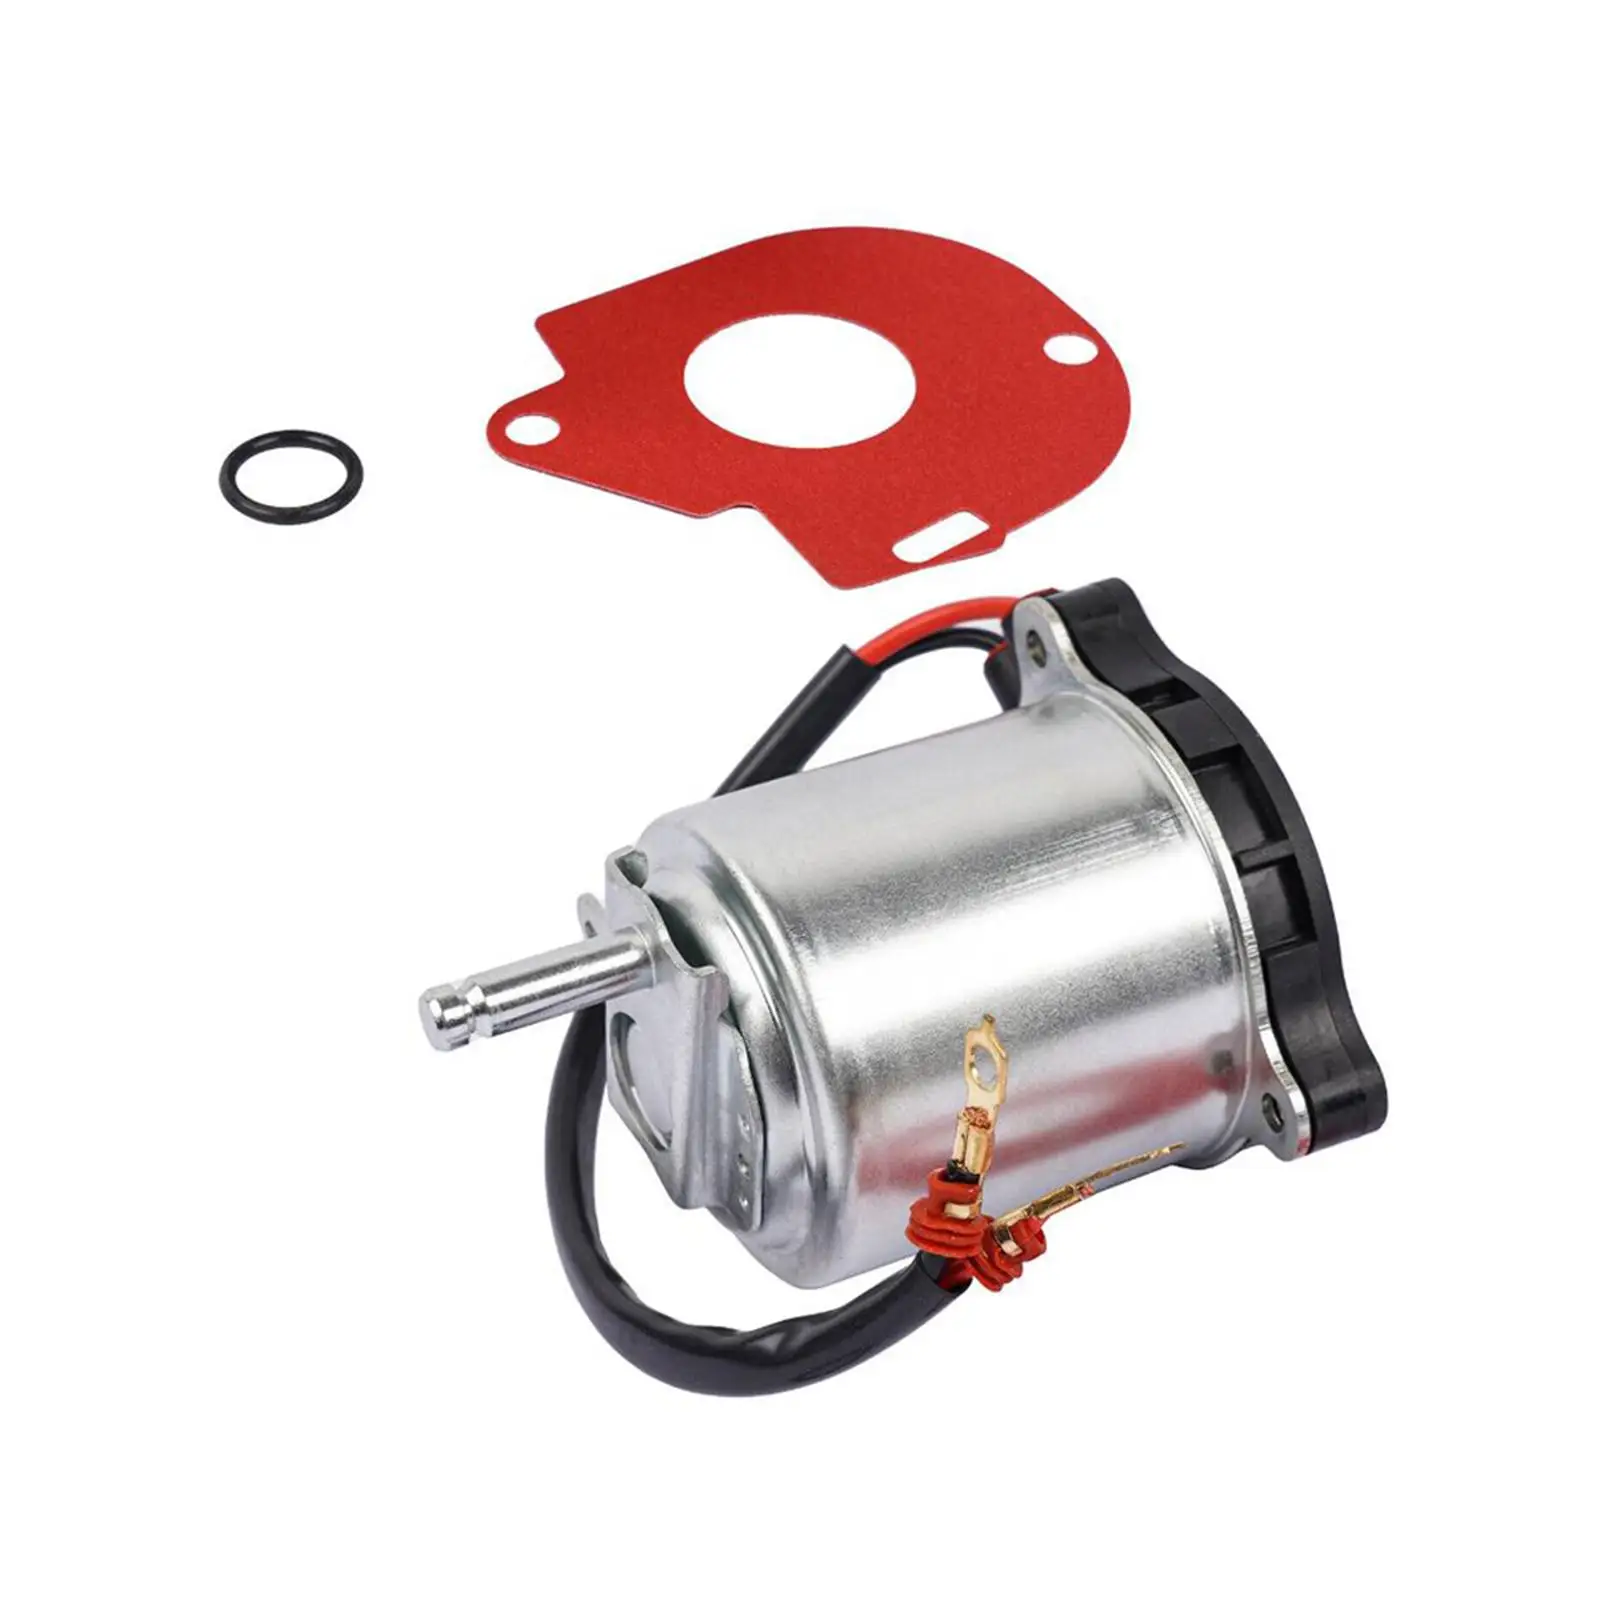 ABS Brake Booster Pump Motor Assembly 47960-60050 High Performance Replace Parts for Toyota FJ Cruiser LX570 Gx460 LX450D